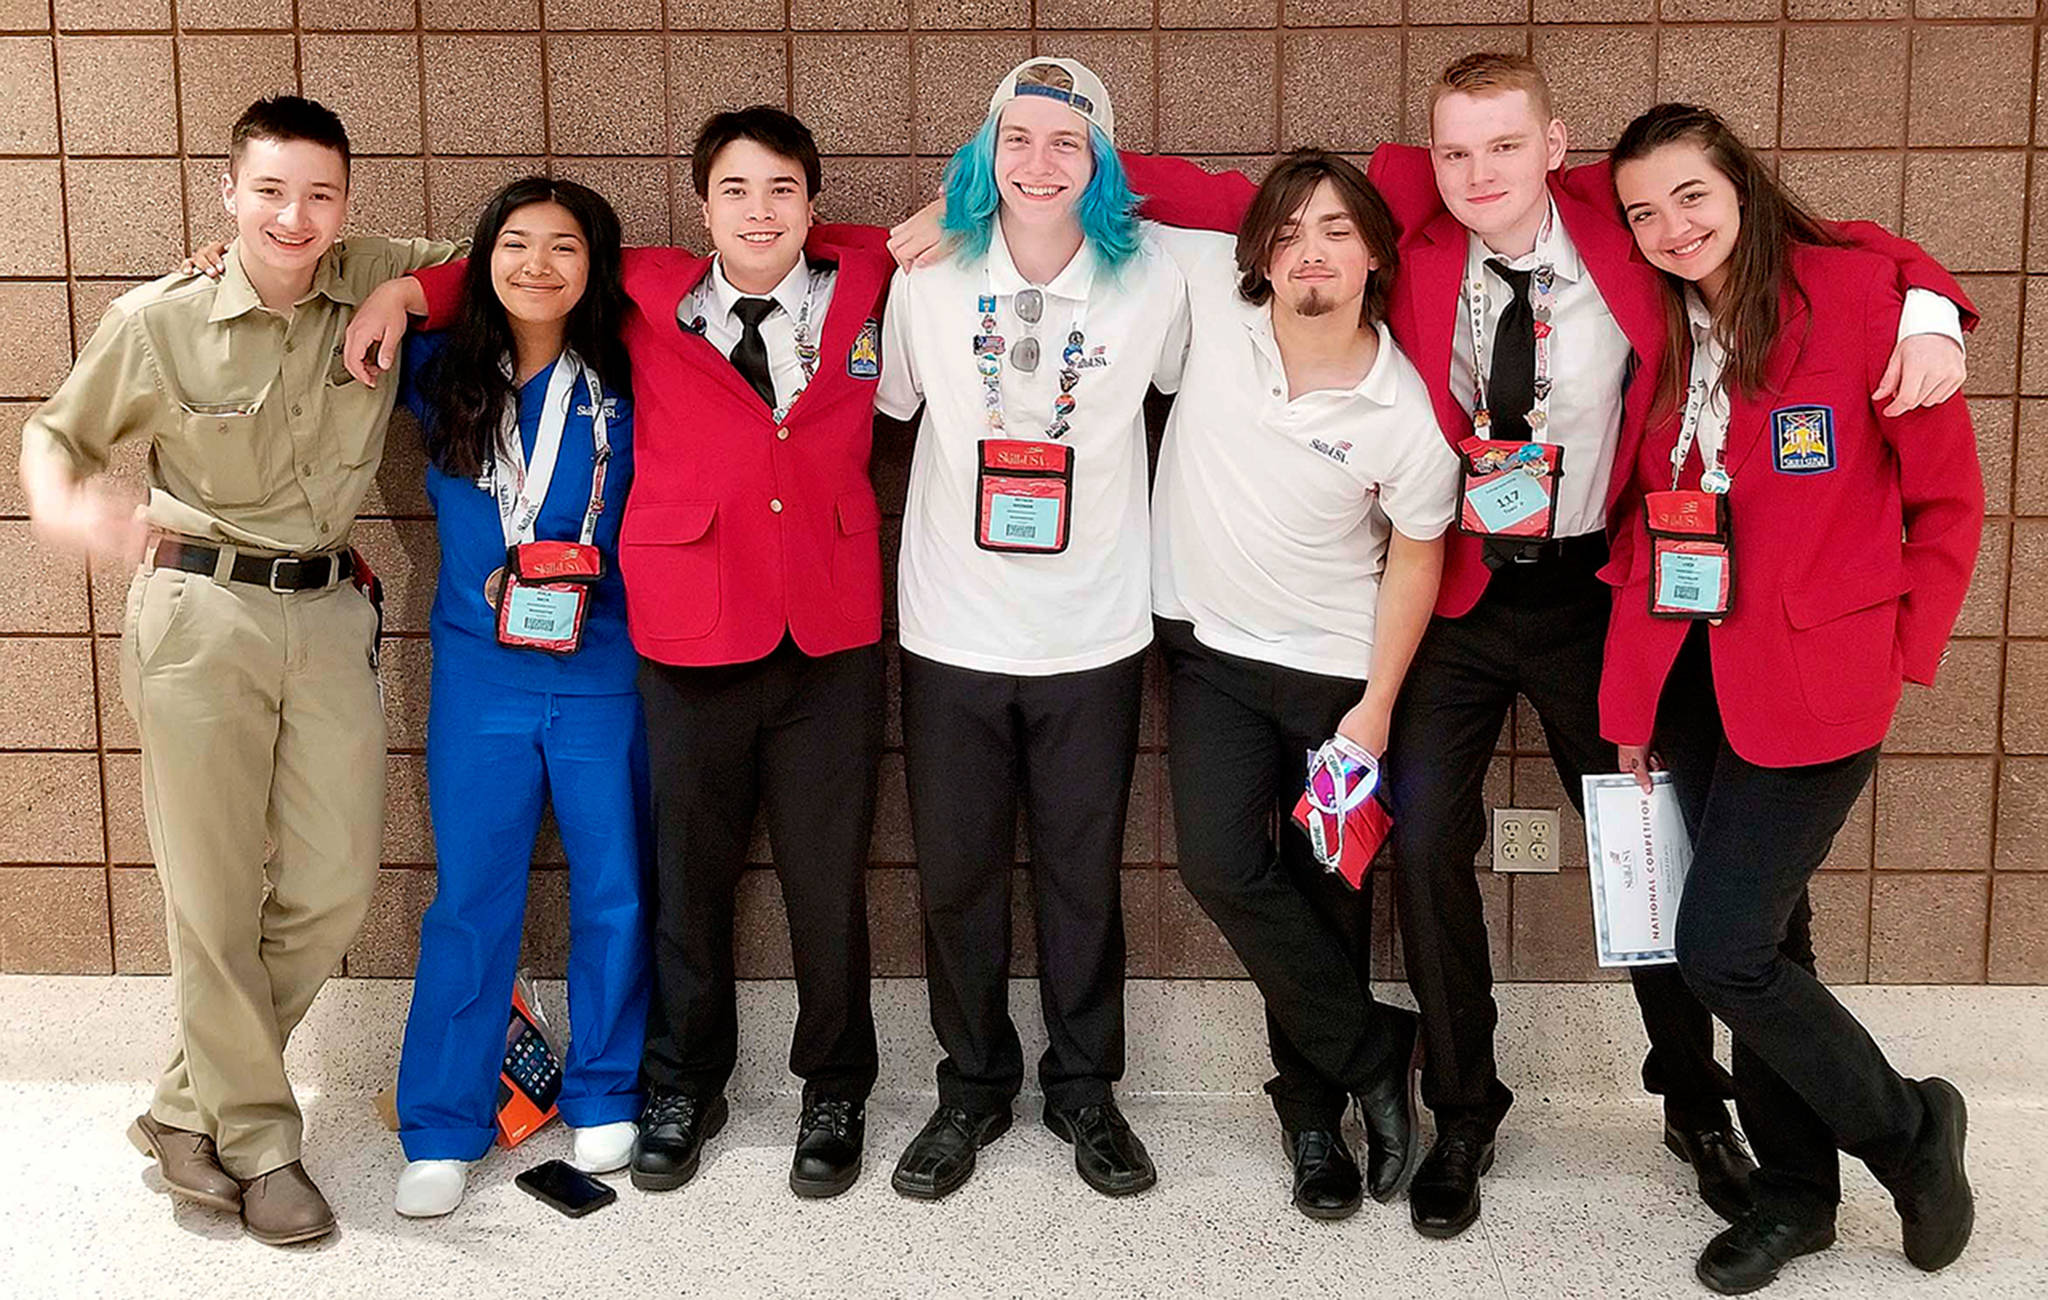 Courtesy Aberdeen School District                                 Aberdeen High School student Perla Mata, second from left, poses with other members of the school’s SkillsUSA Team.